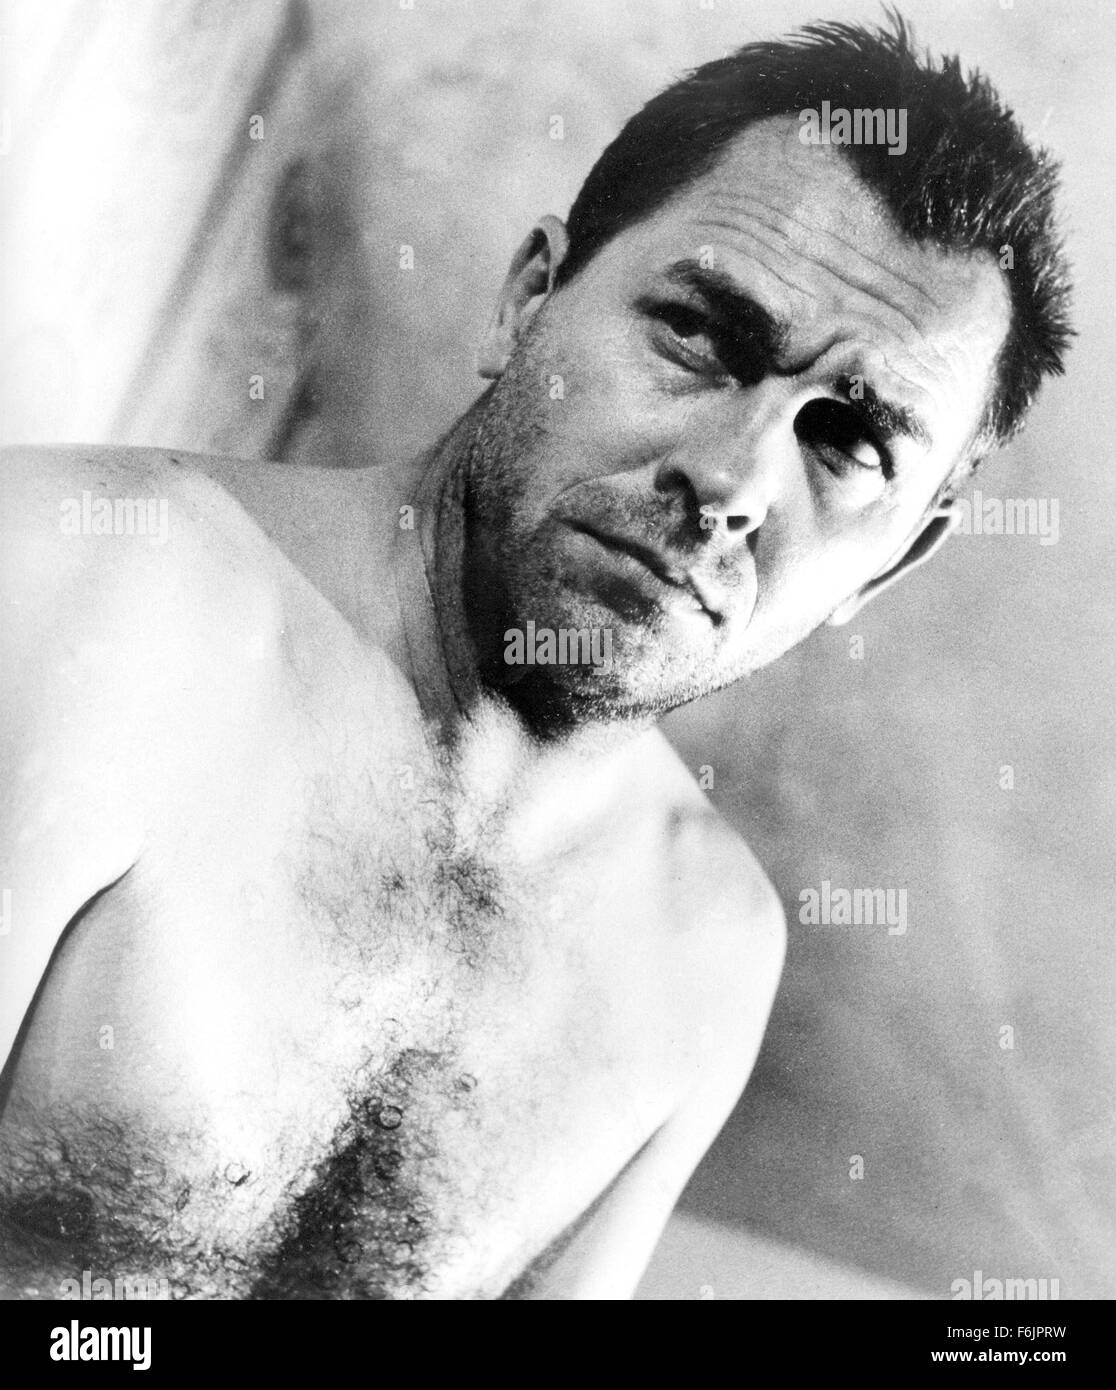 Nov 07, 2004; Los Angeles, CA, USA; File Photo: 1959 MGM Movie Still from 'Flood of Fear.' Singer HOWARD KEEL, the baritone who romanced his way through a series of glittery MGM musicals such as 'Kiss Me Kate' and 'Annie Get Your Gun' and later revived his career with television's 'Dallas,' died Sunday of colon cancer. He was 85. Keel studie shis lines before performance. Stock Photo